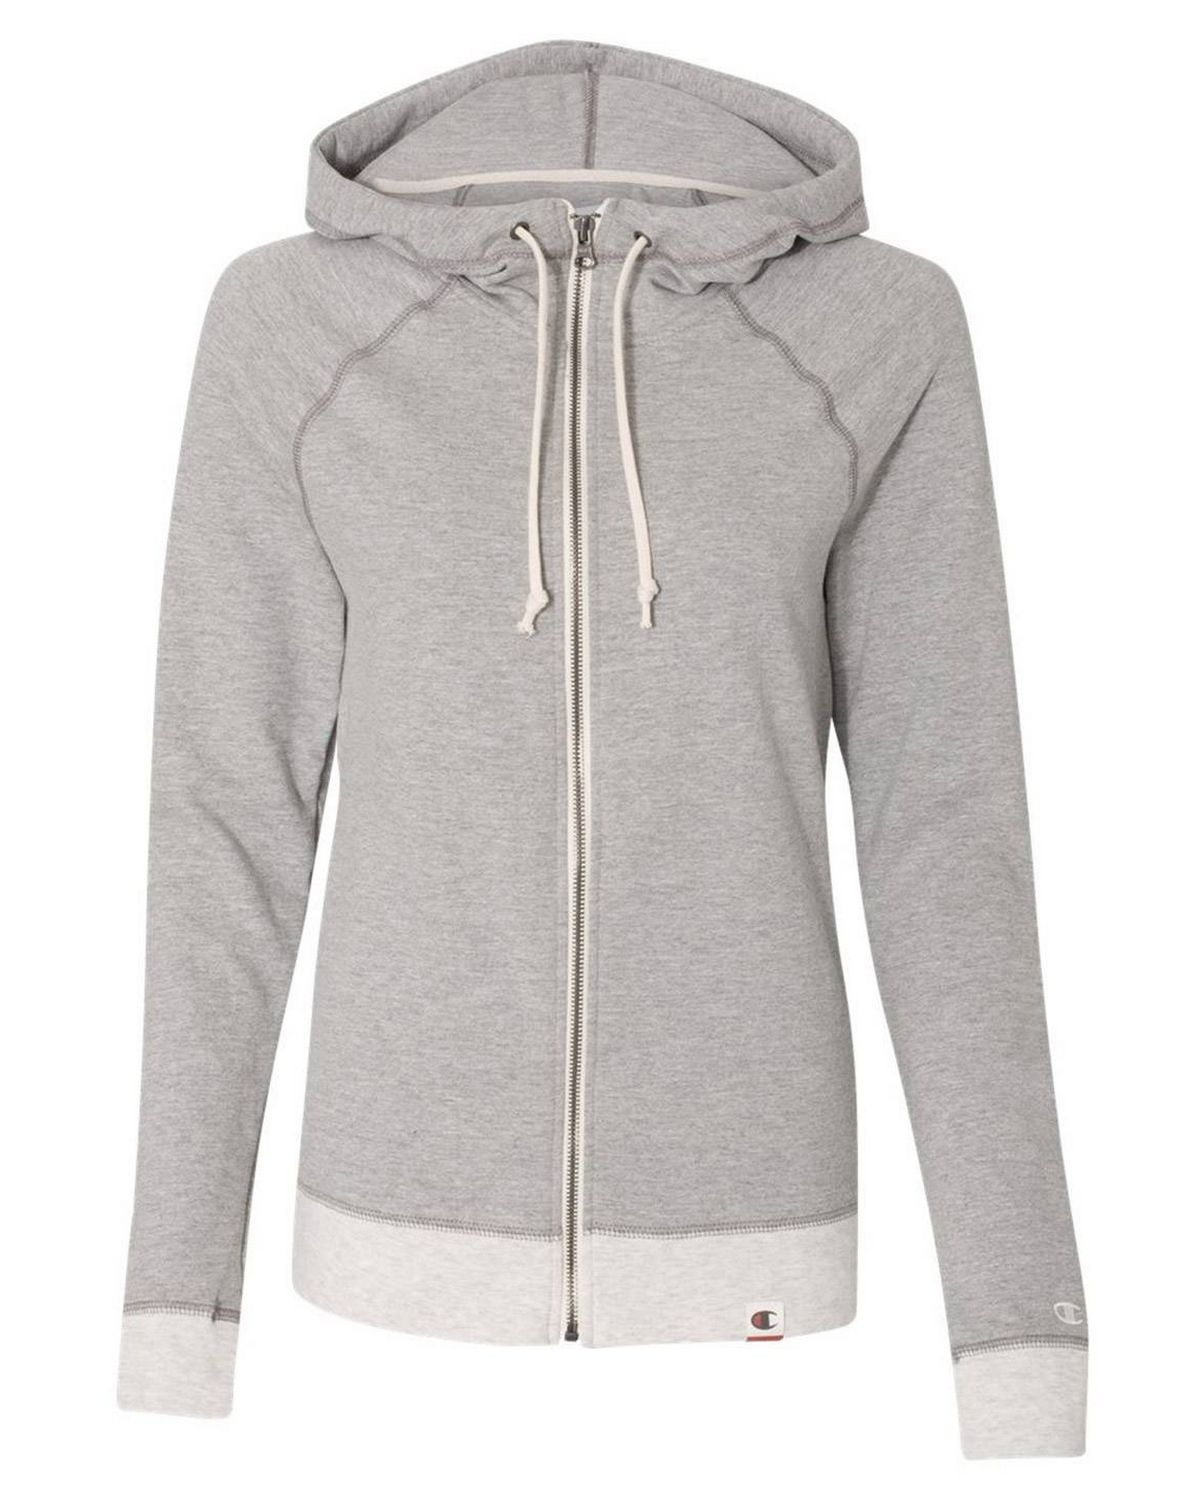 Champion AO650 Originals Womens French Terry Hooded Full-Zip